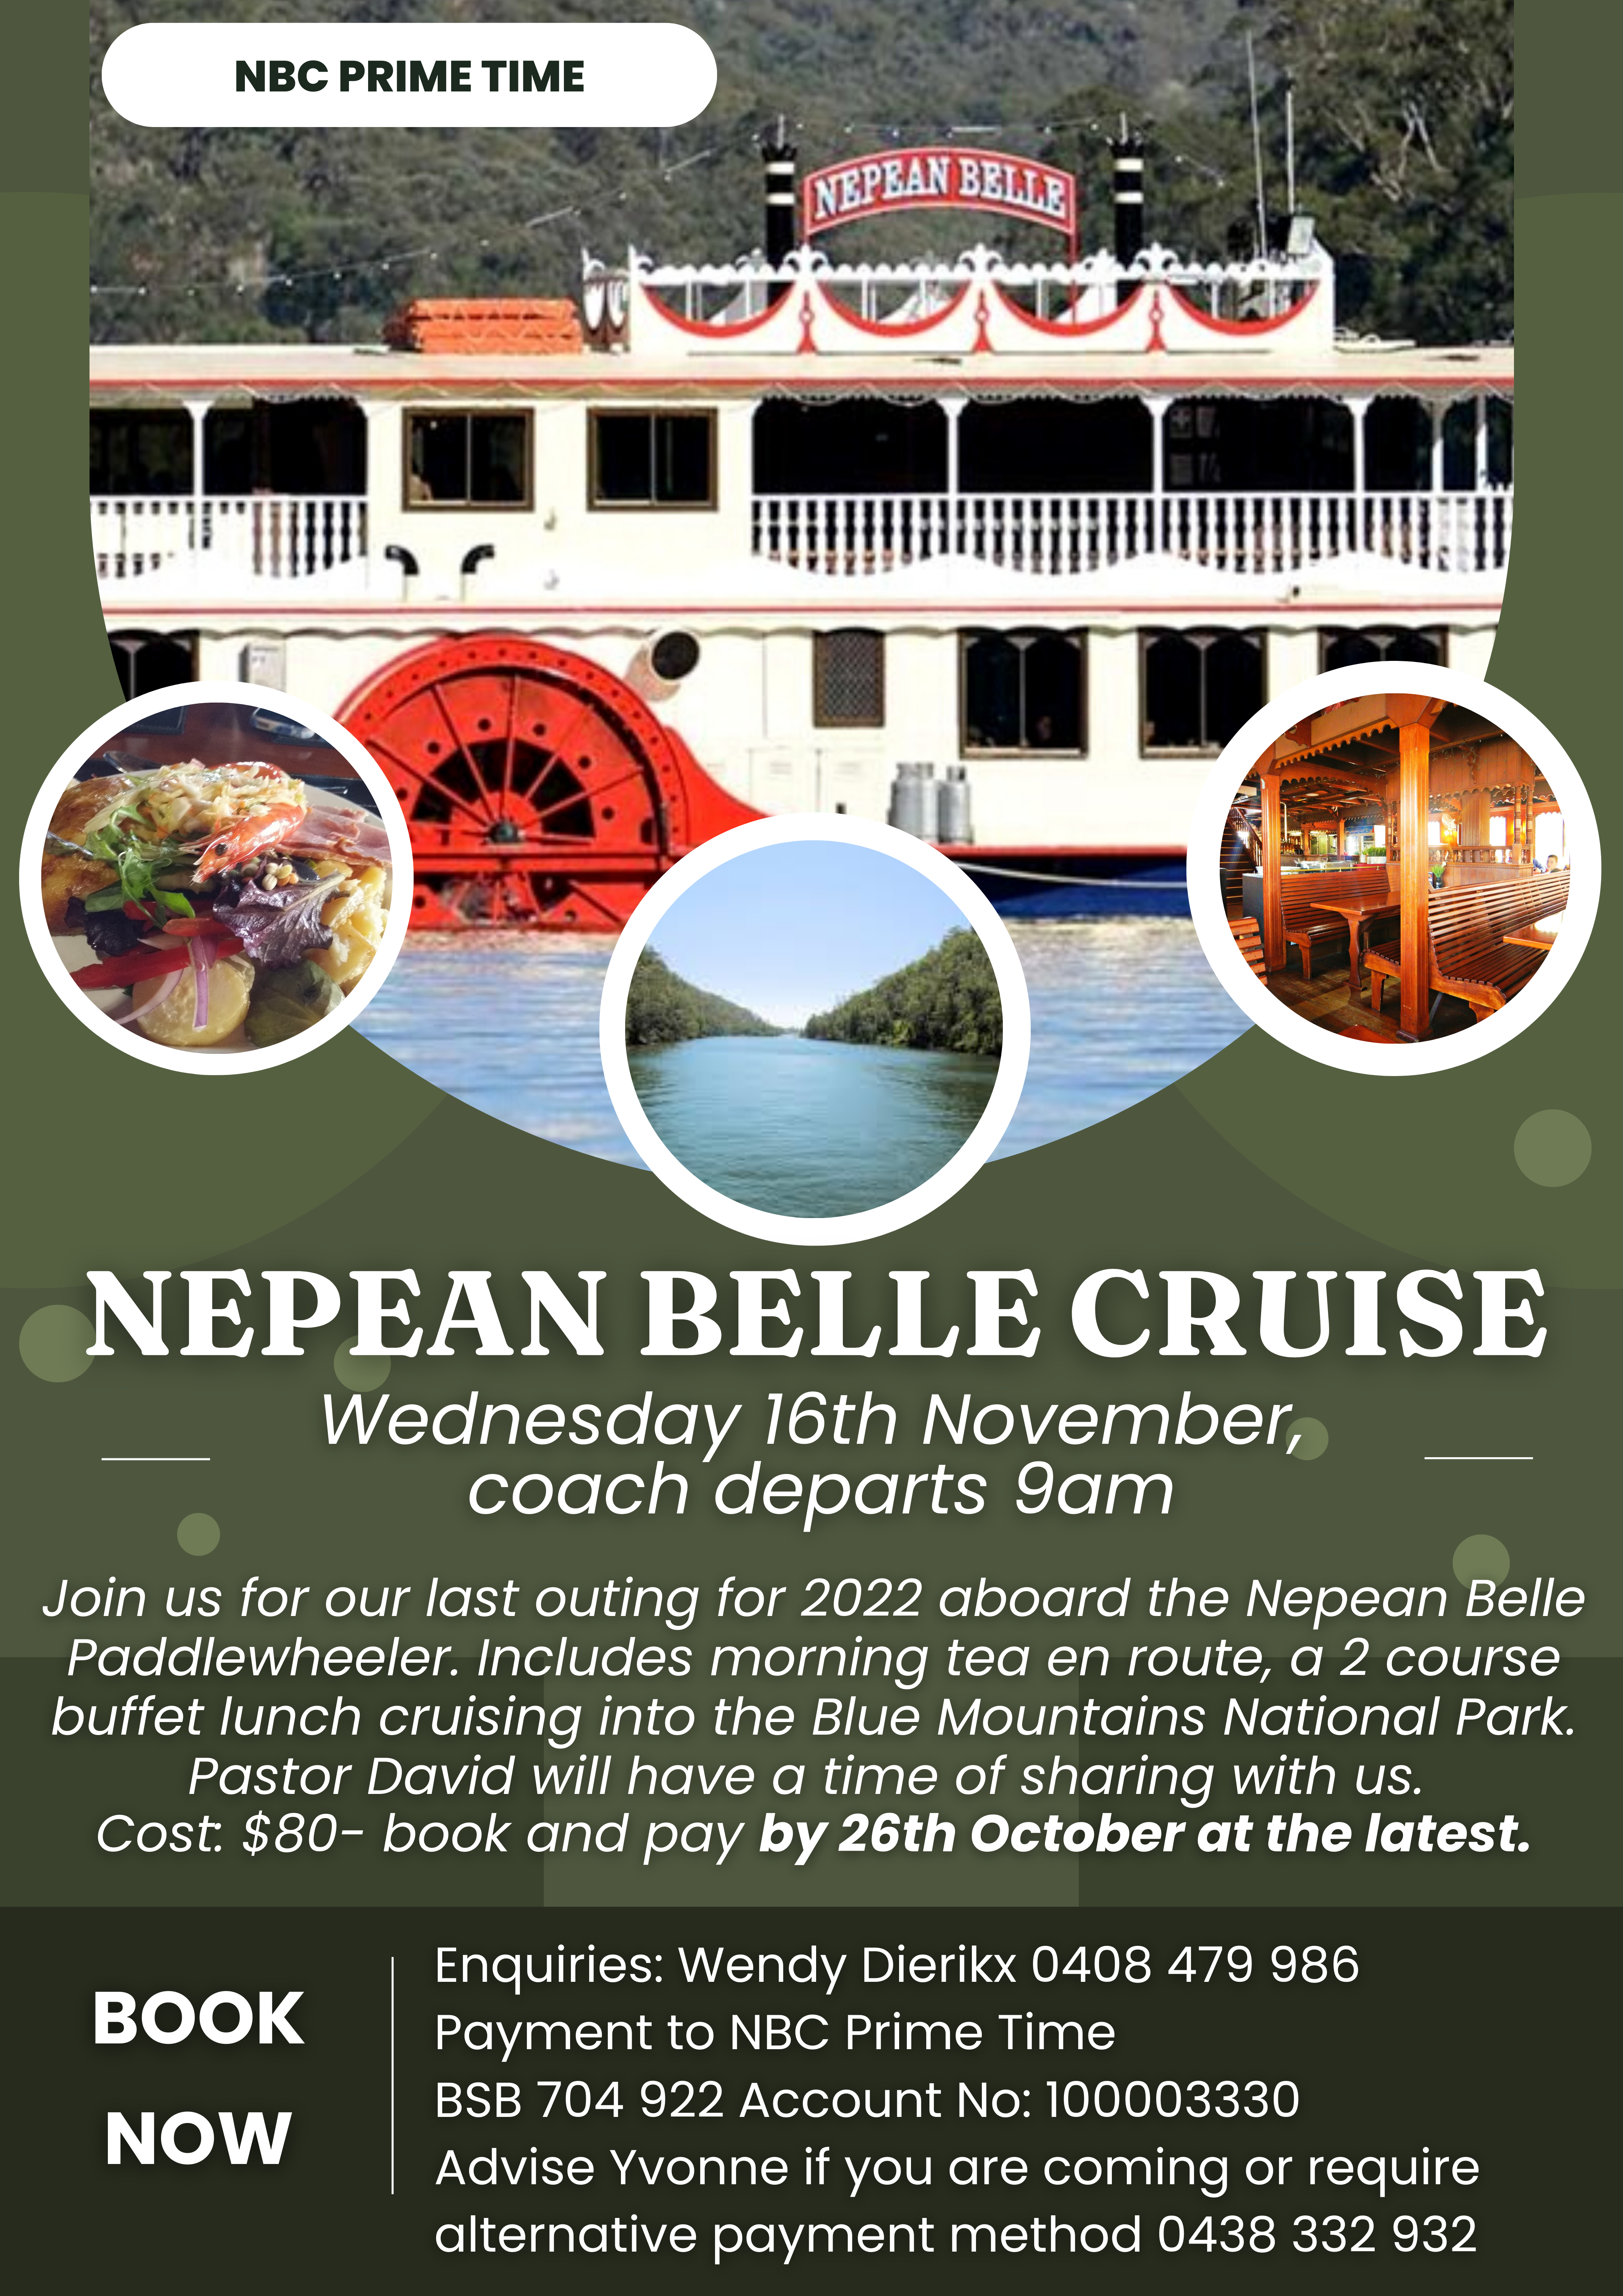 Prime Time Nepean Belle Cruise